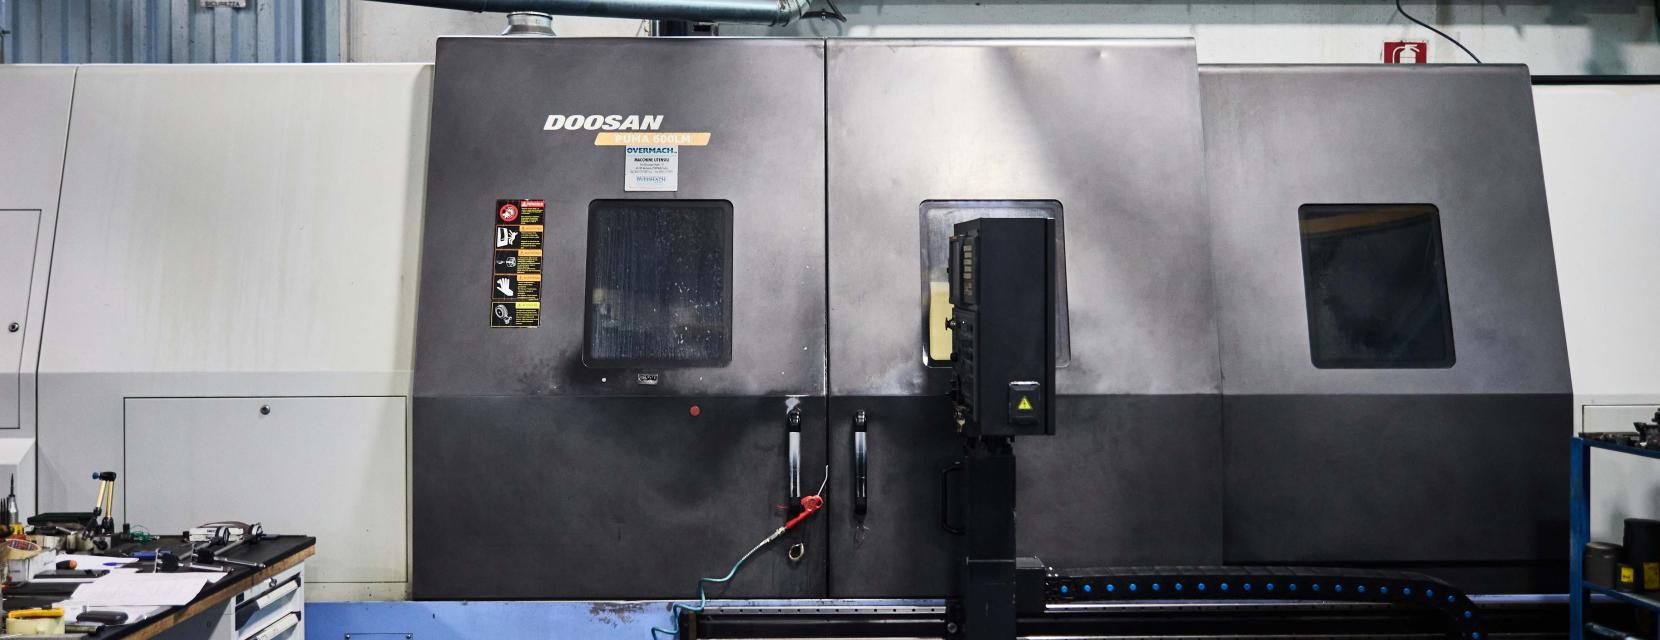 DOOSAN PUMA 600, the evergreen that produces without ever disappointing